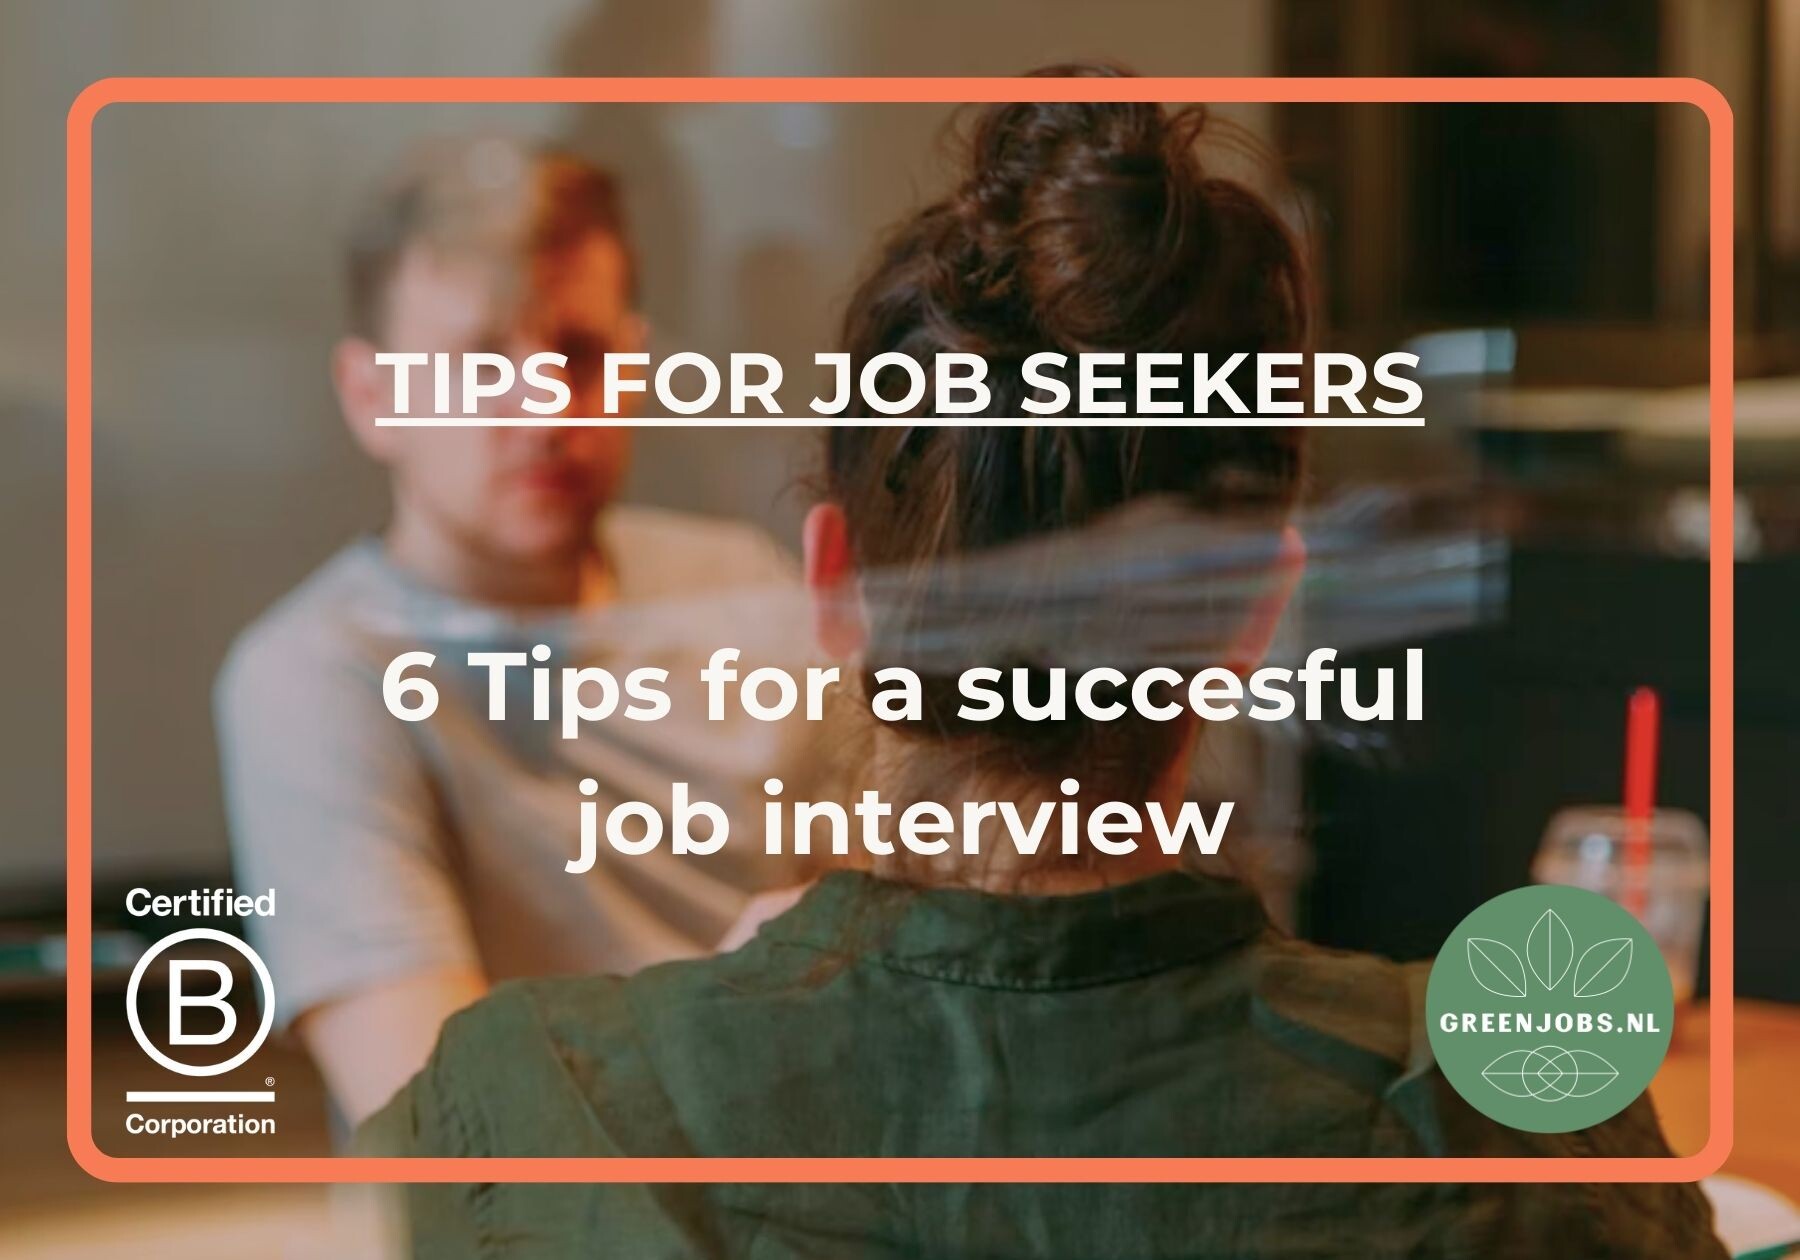 Six tips for a successful job interview